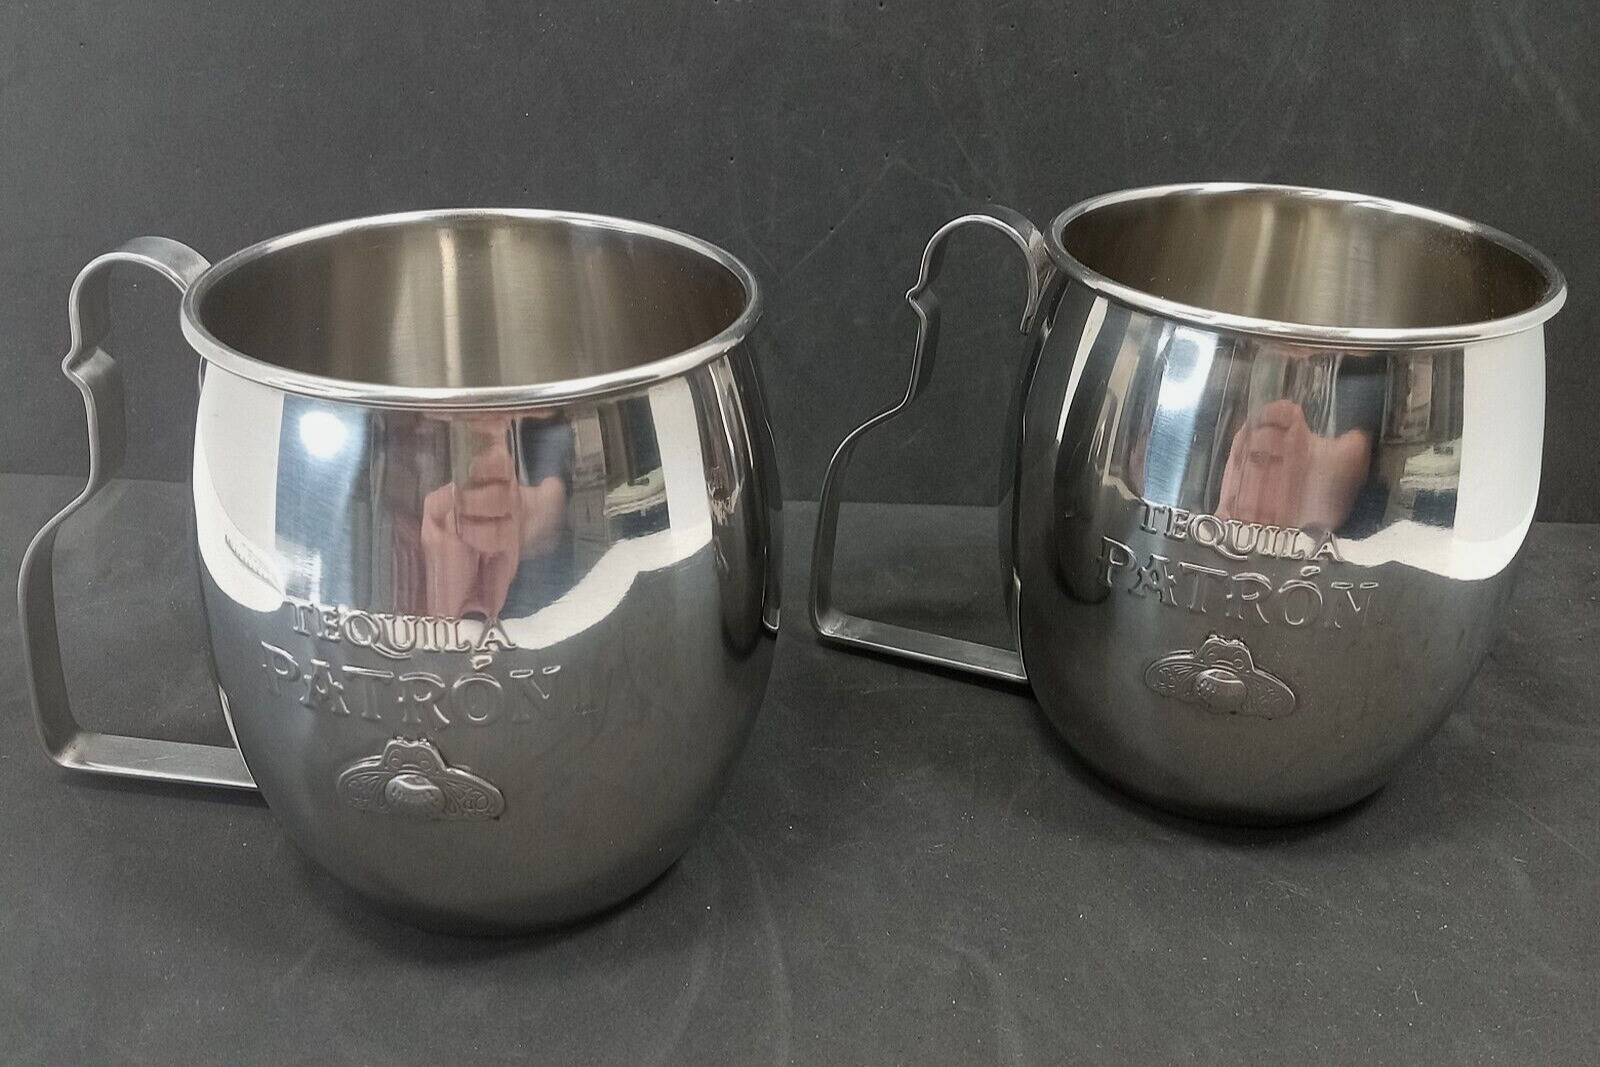 2 Tequila Patron Stainless Steel Moscow Mule Mugs Barware Cups